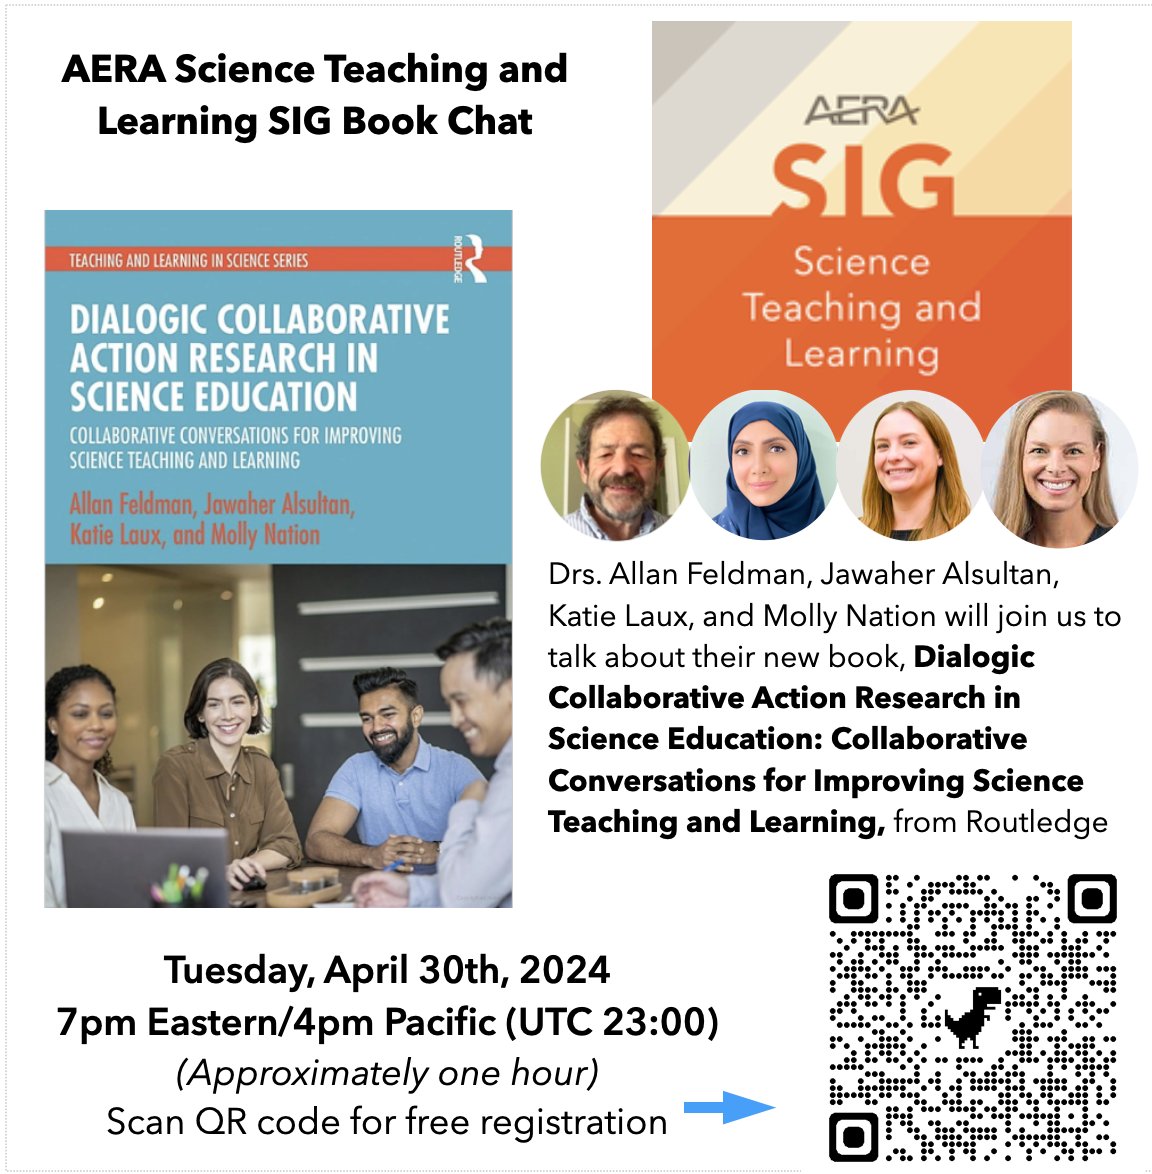 Join @aerastl on Zoom April 30th at 7pm EST/4pm PST for a chat with with Drs. Allan Feldman, @Jasalsultan Katie Laux, & Molly Nation about their new book, 'Dialogic Collaborative Action Research in Science Education' from @routledgebooks Register here: montclair.zoom.us/meeting/regist…